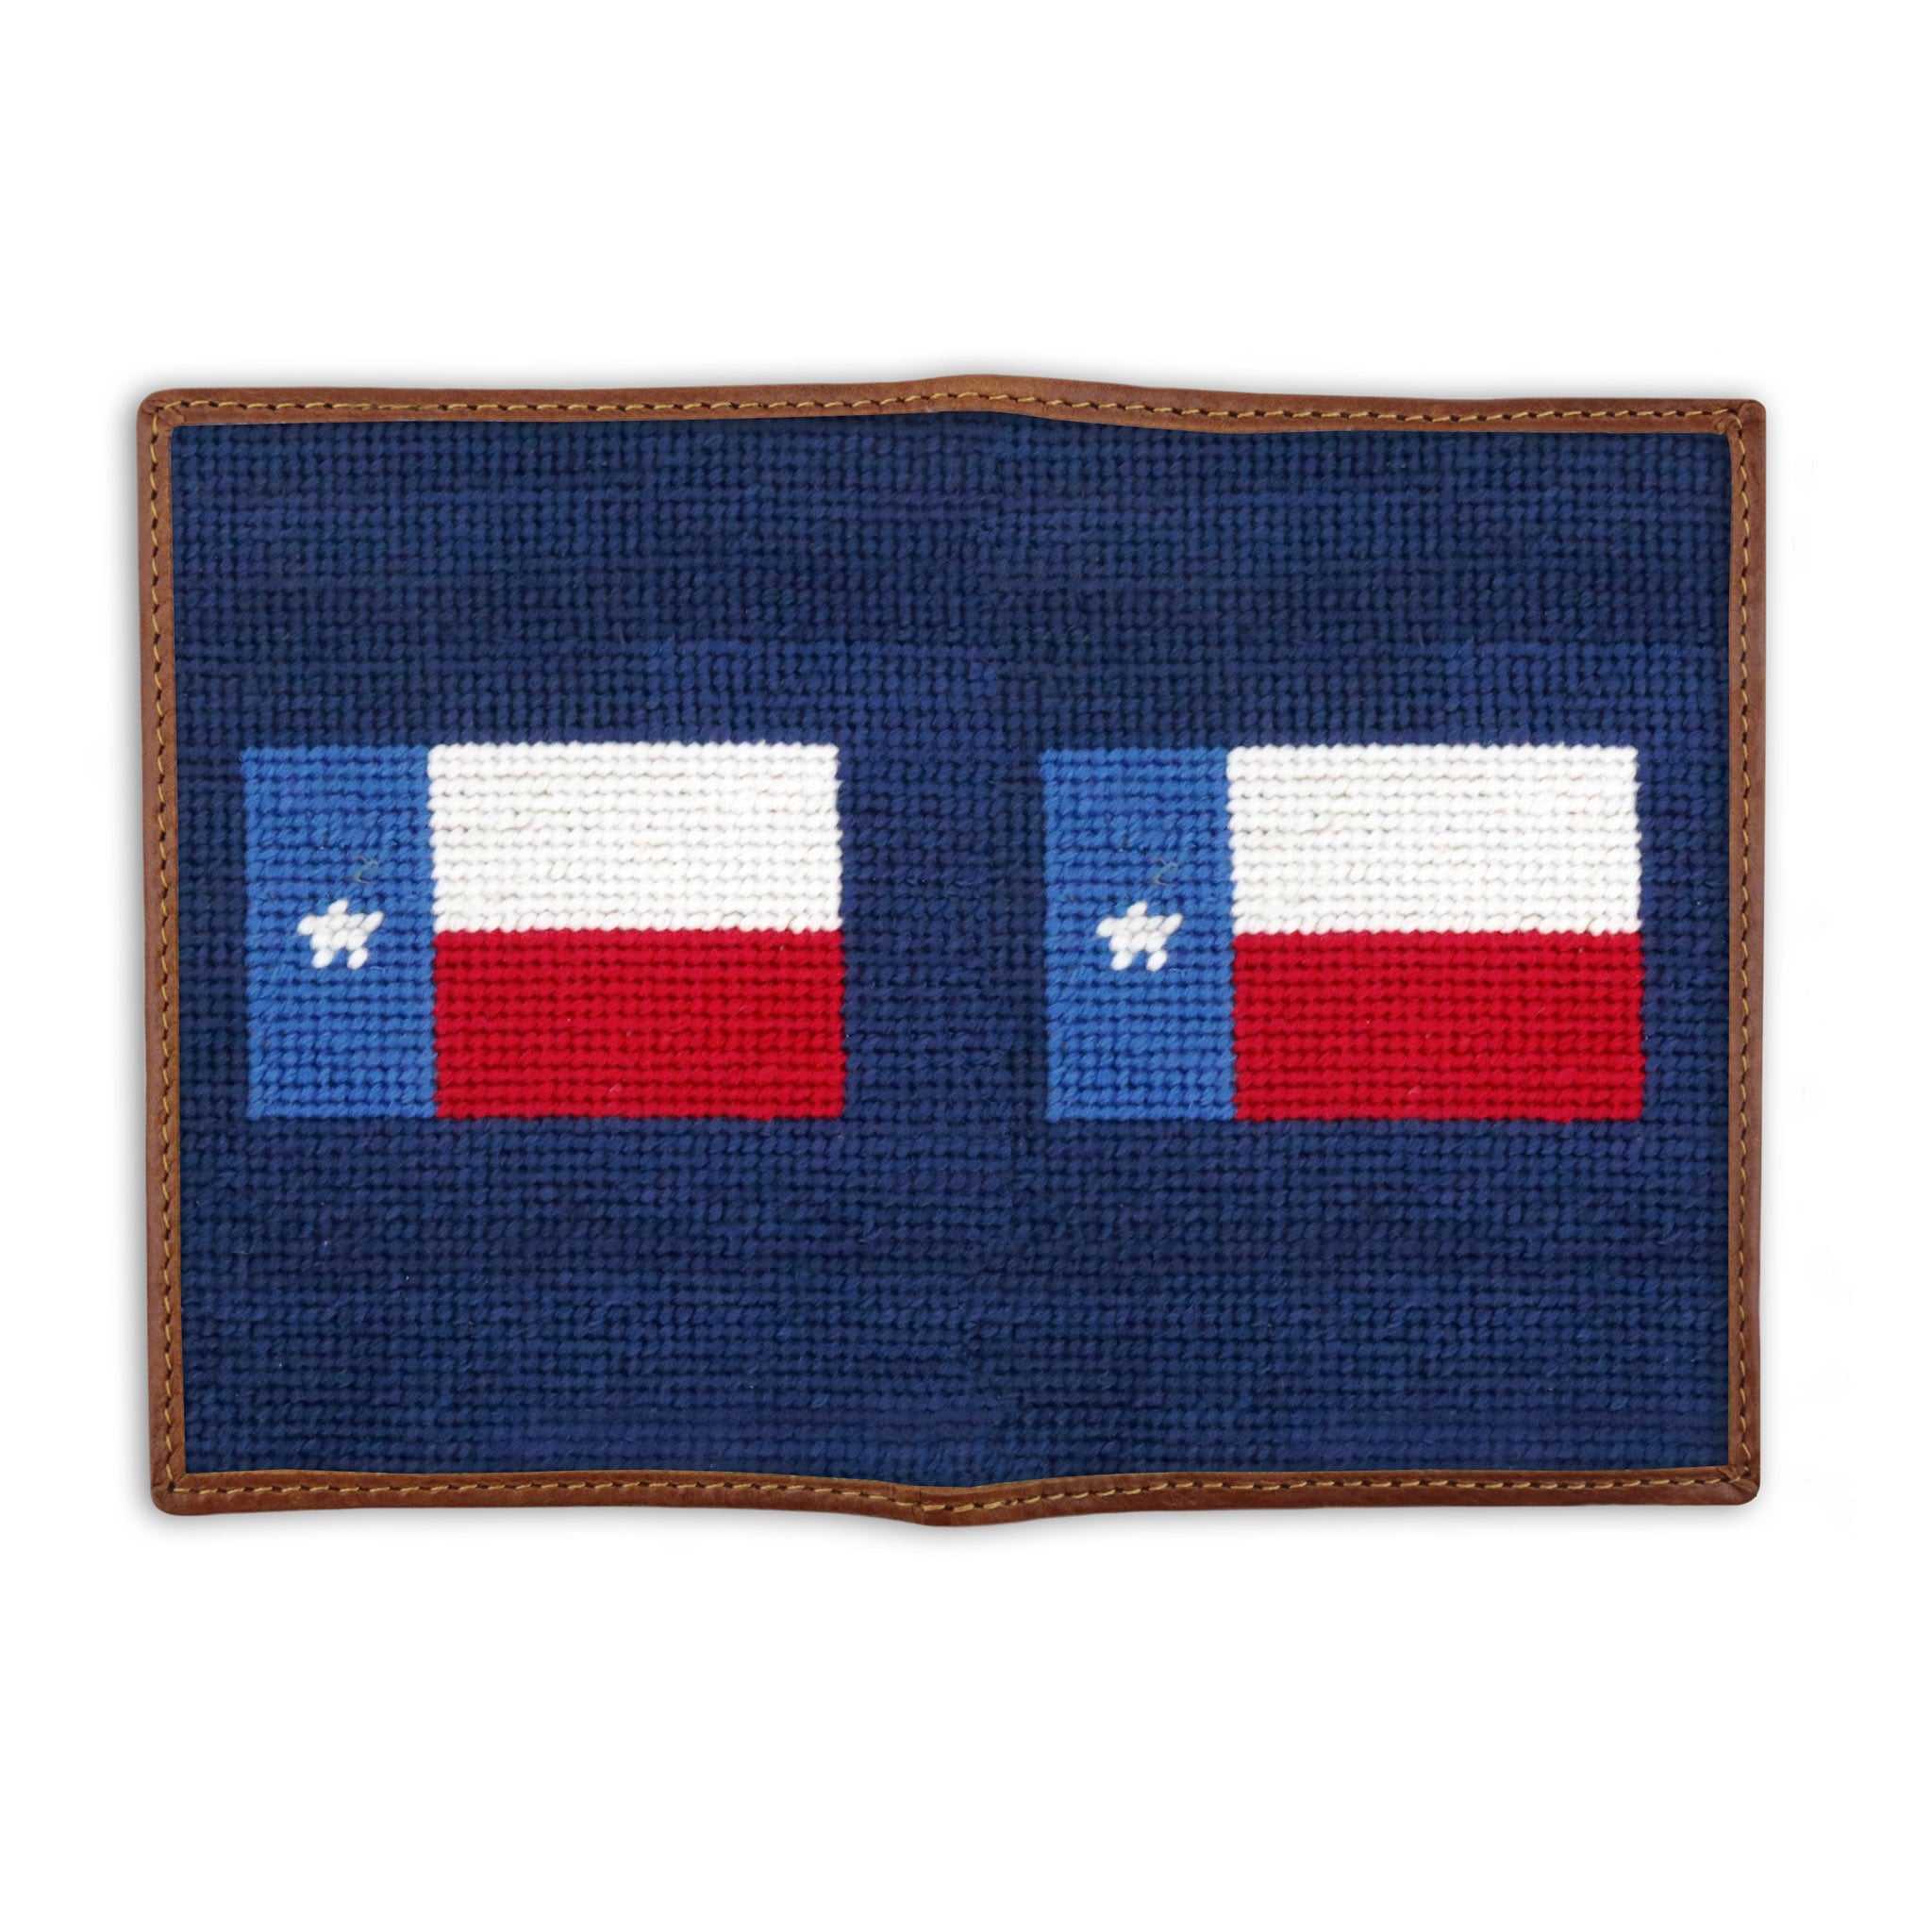 Smathers and Branson Texas Flag Classic Navy Needlepoint Passport Case Opened 